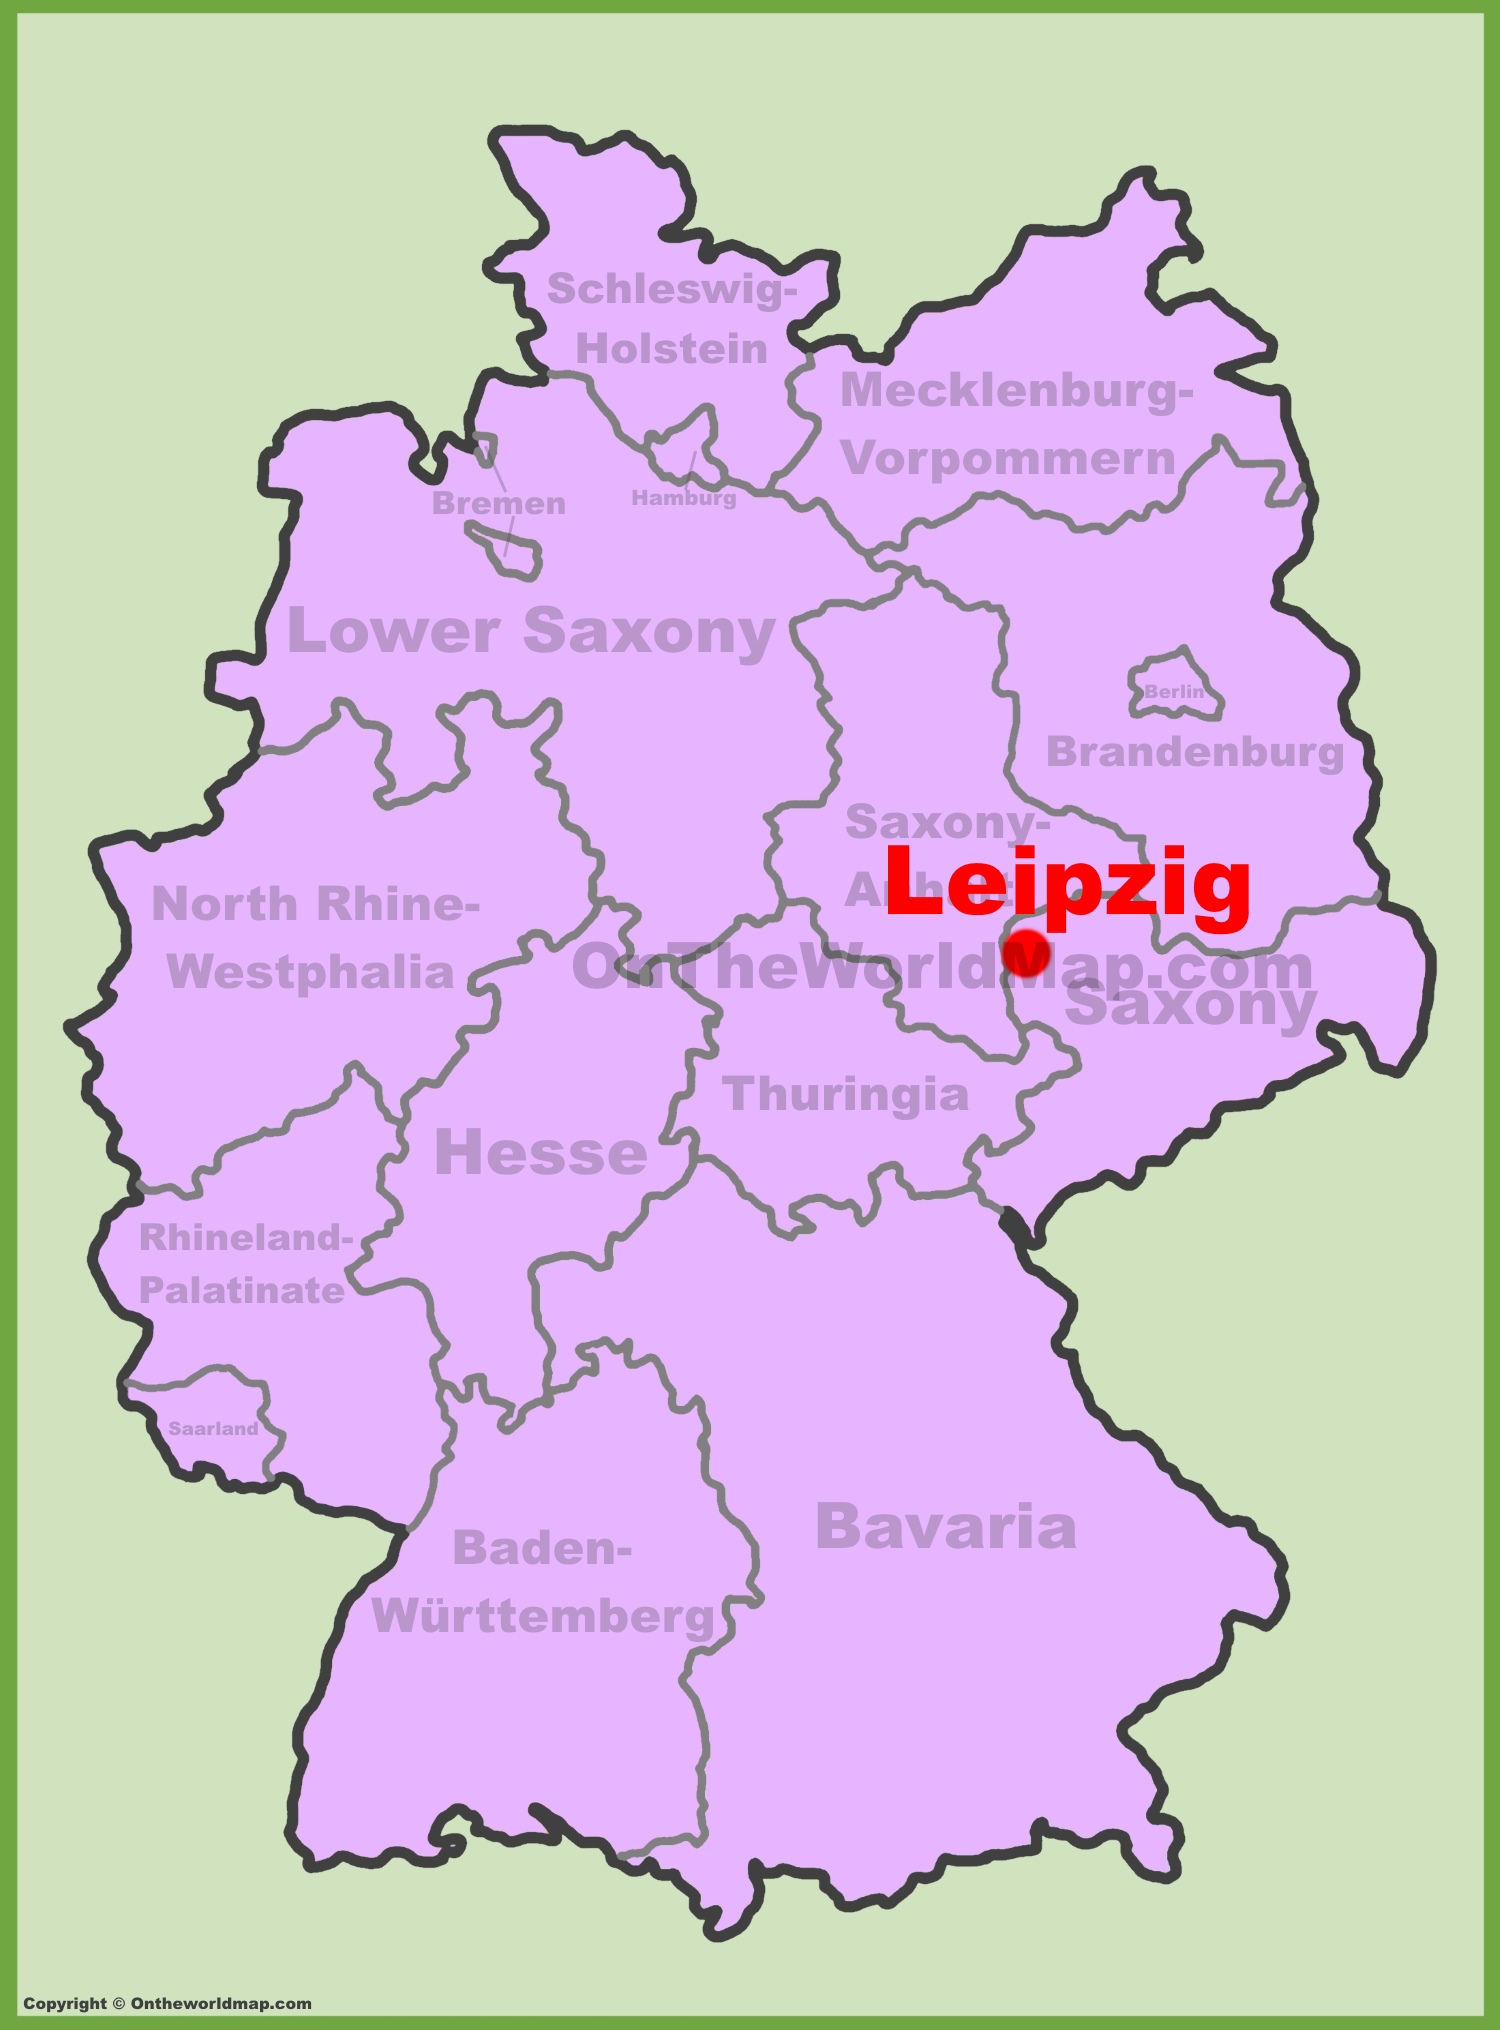 Leipzig Location On The Germany Map